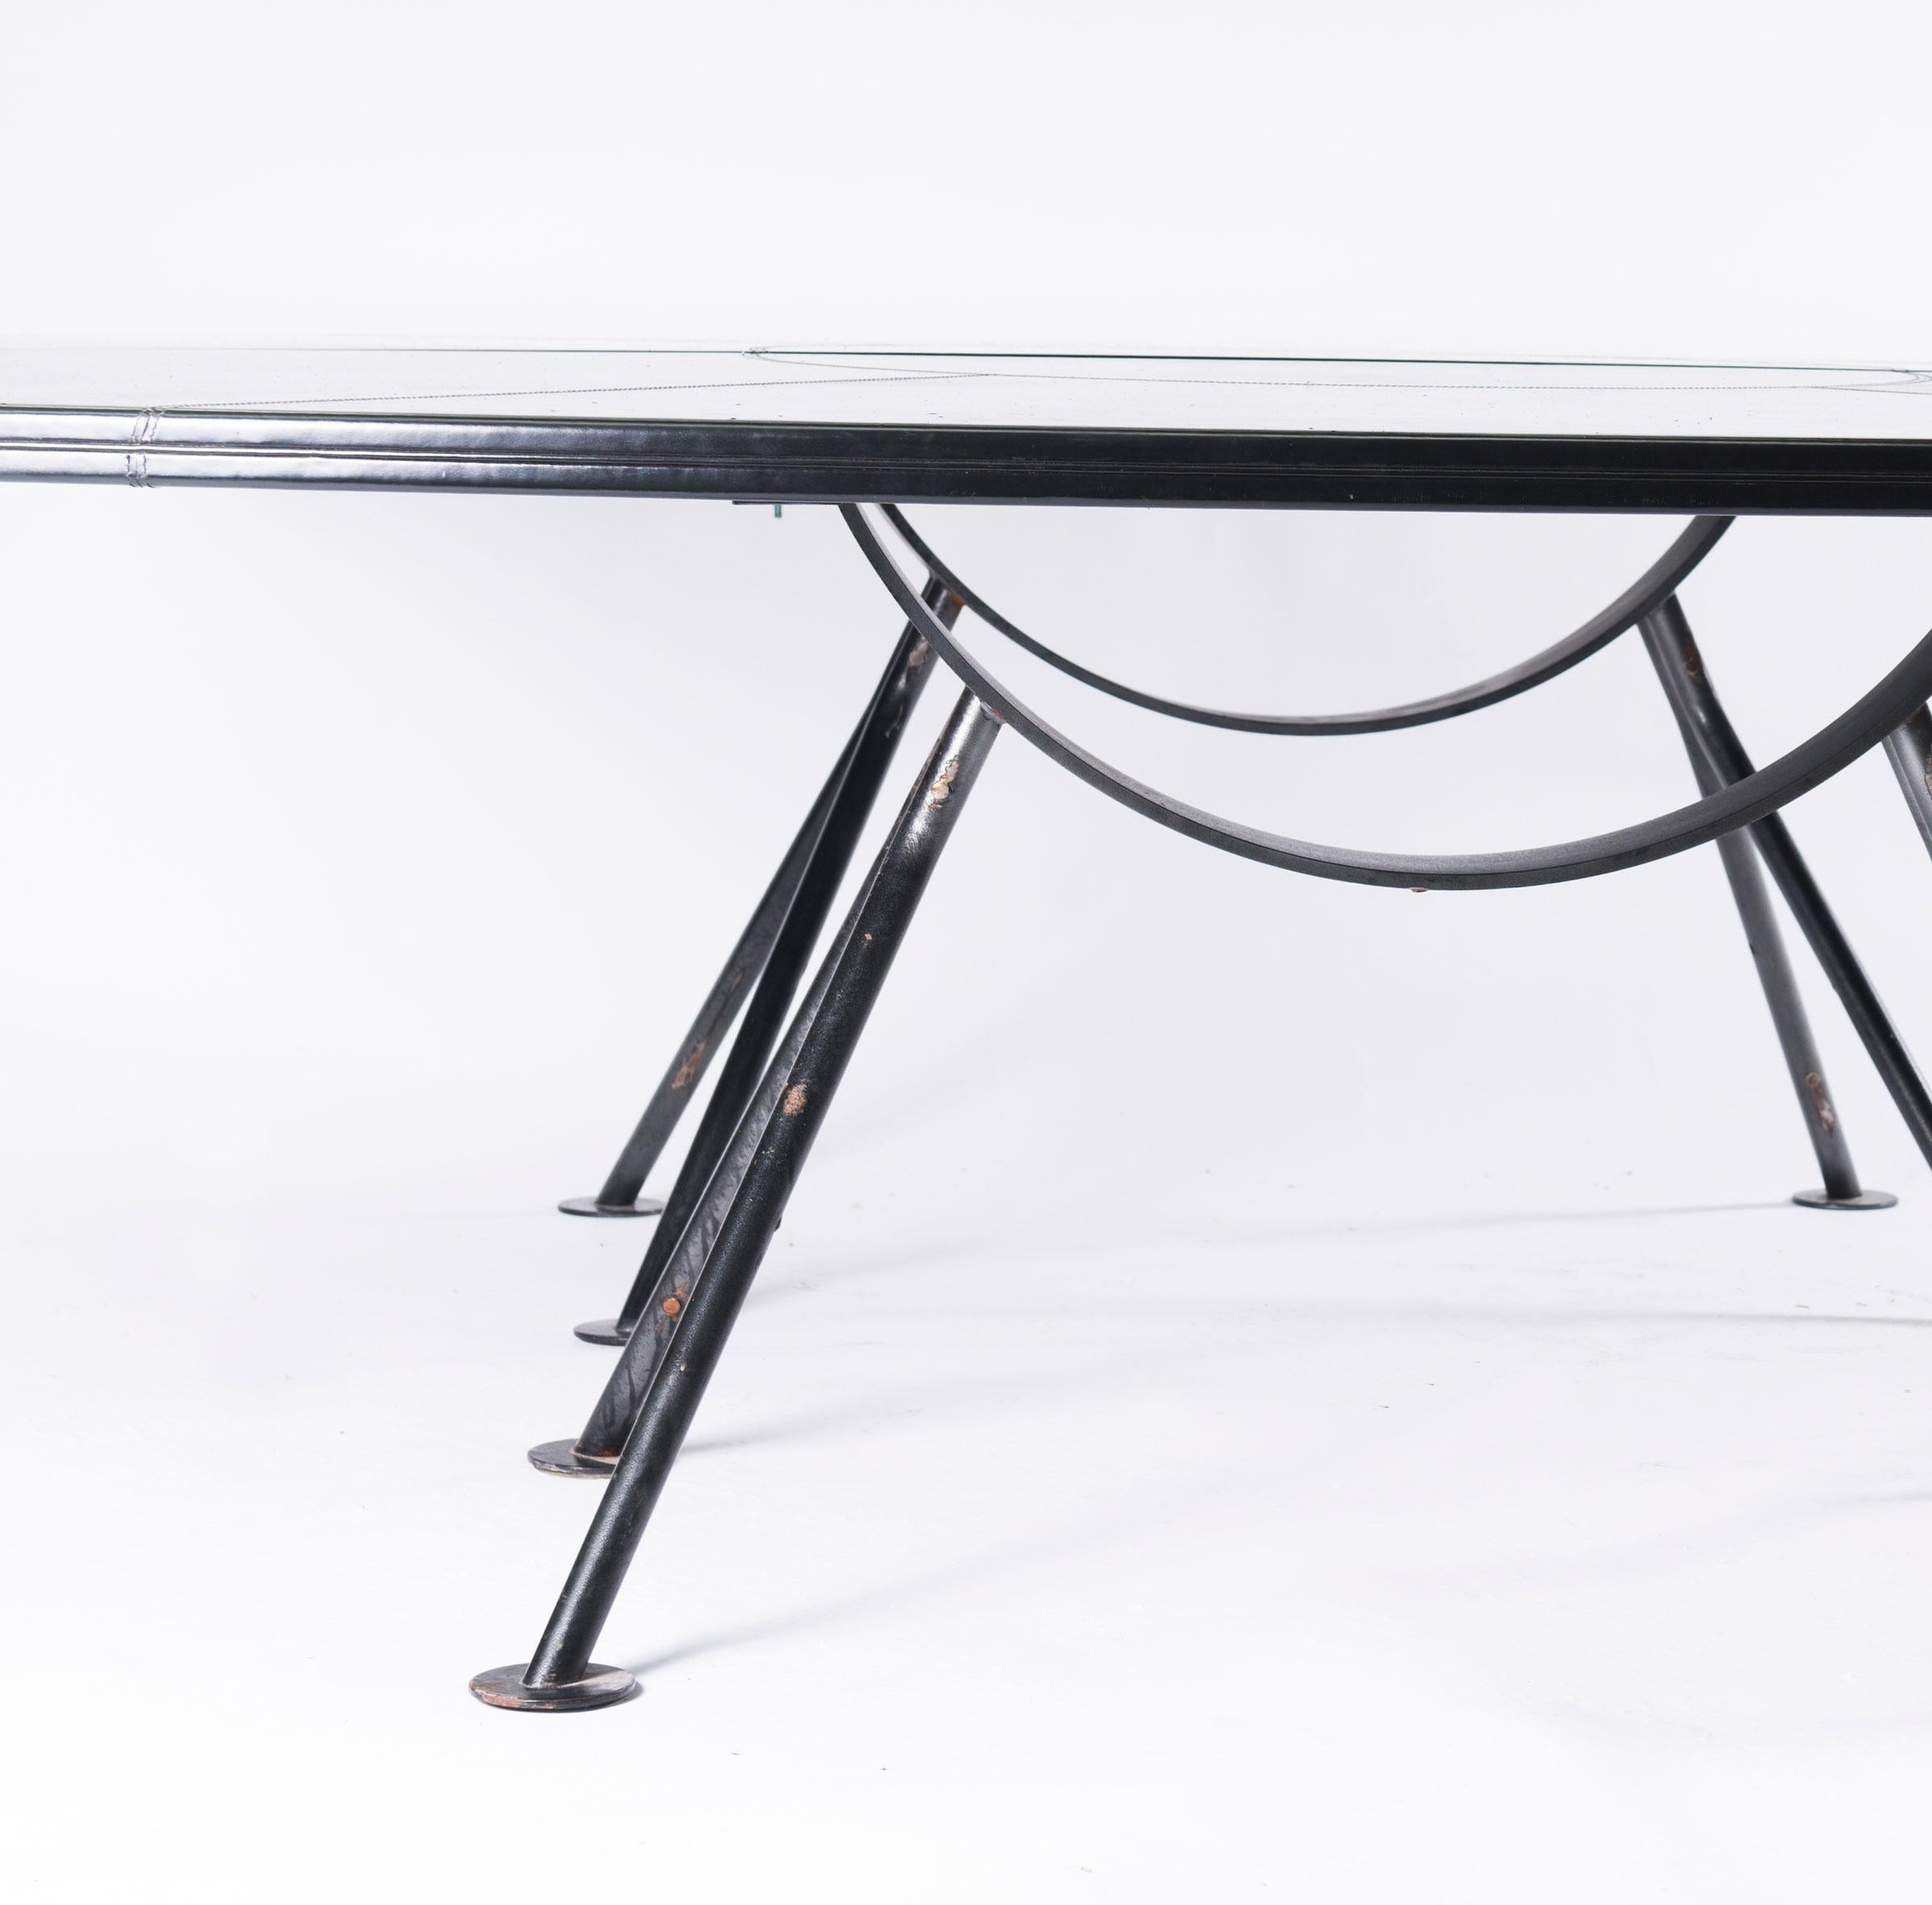 English Exclusive Designer Desk Sir Norman Foster Architecture School, 1980s For Sale